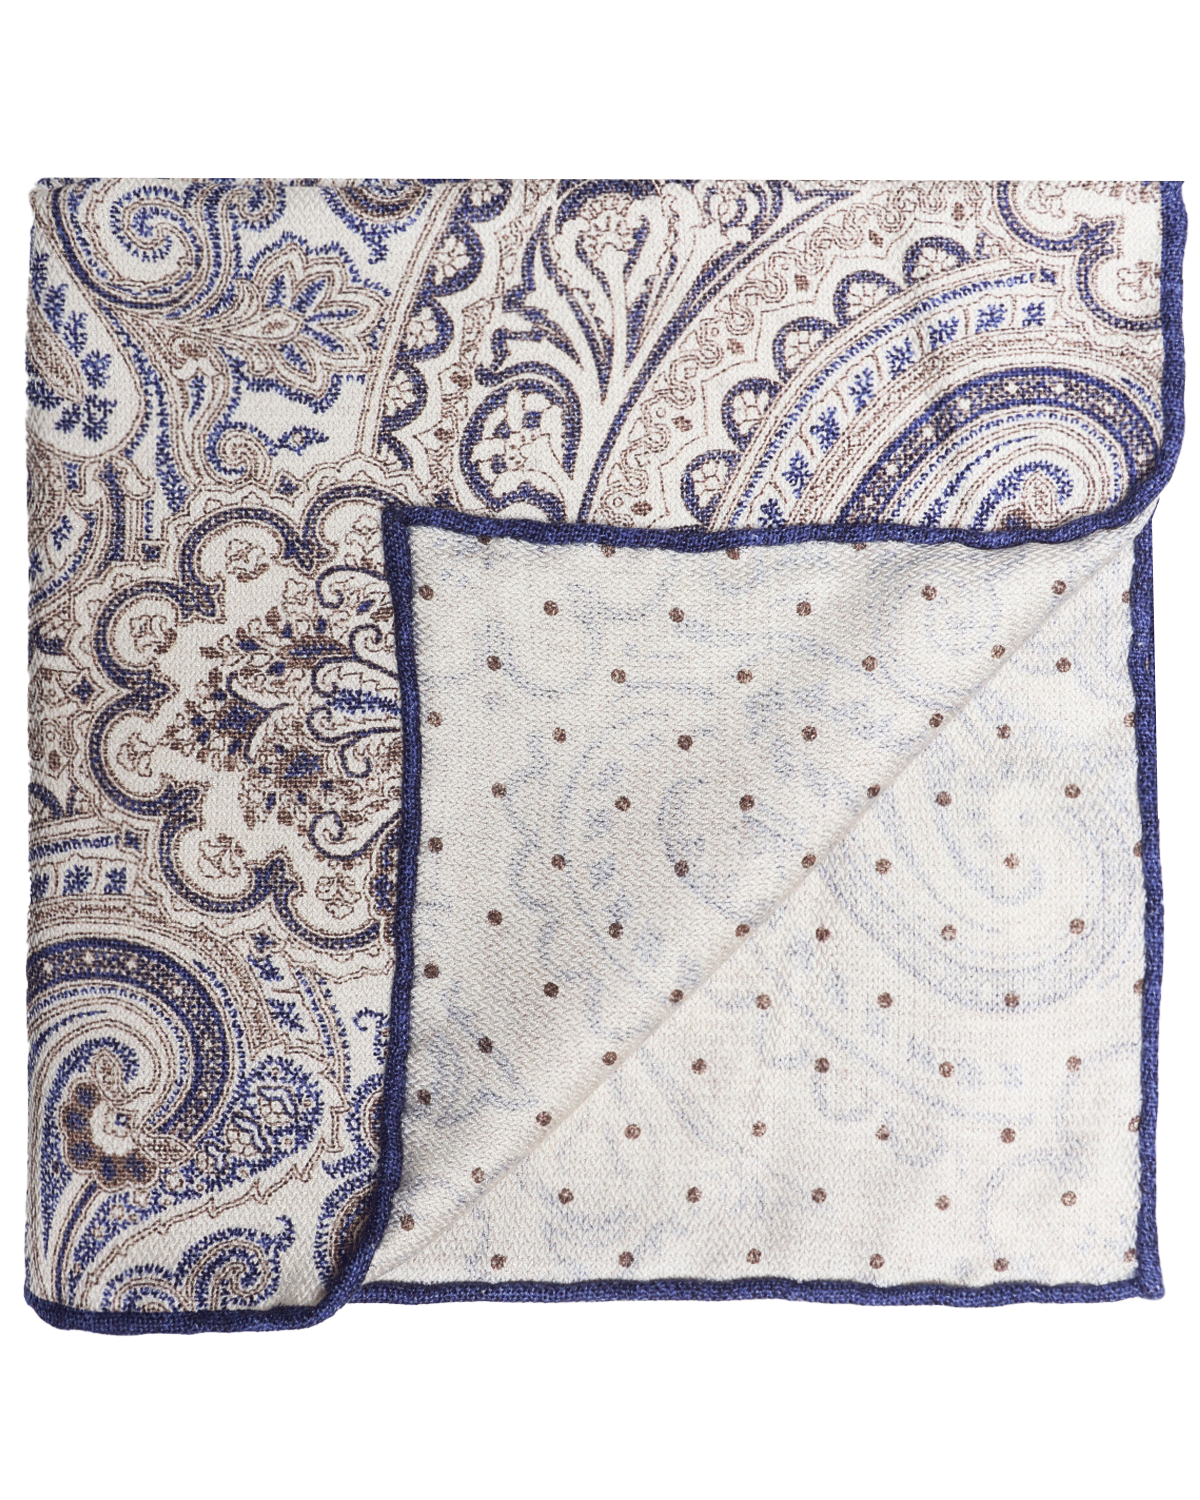 Blue and White Reversible Paisley Silk Pocket Square